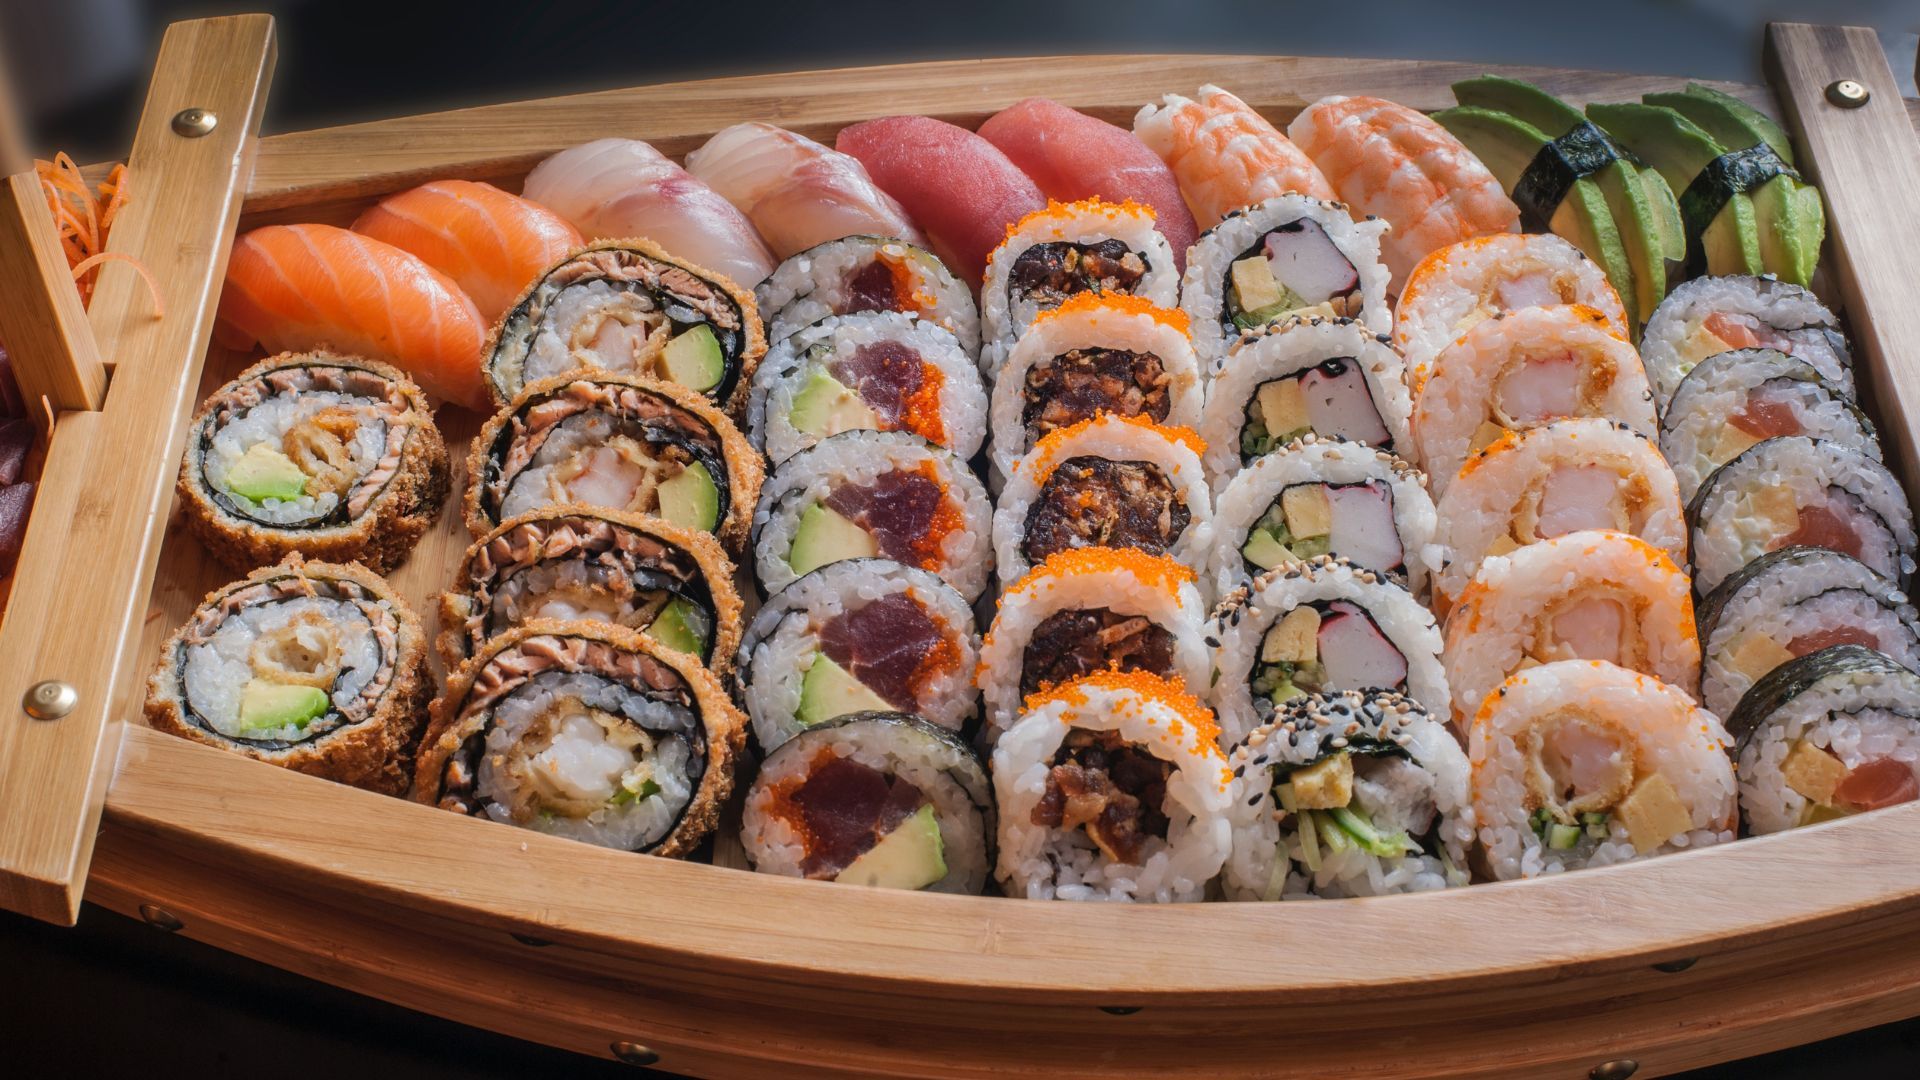 Looking for sushi? These Are Top 5 Sushi Restaurants in Seminyak